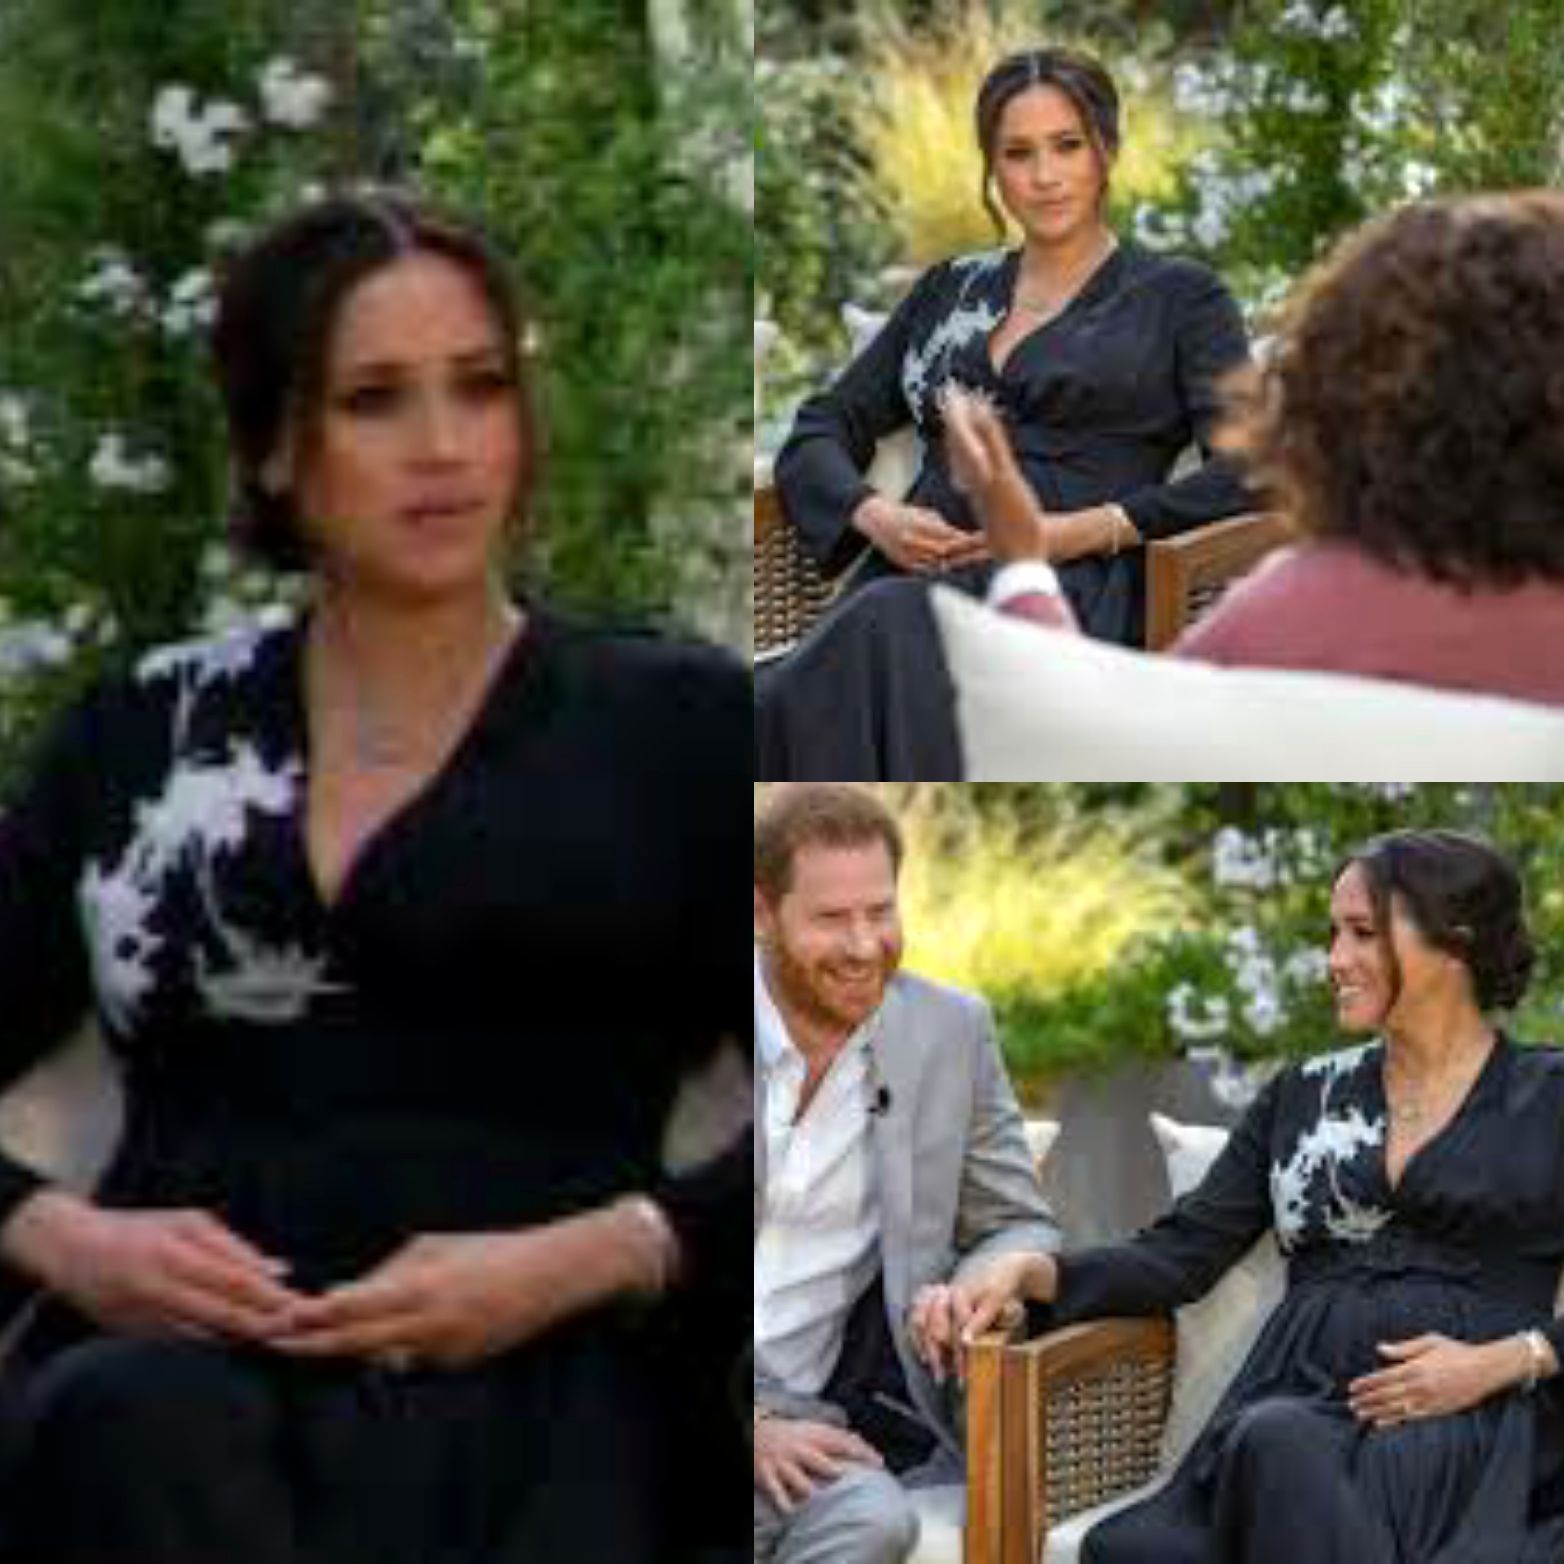 Giorgio Armani dress worn by Meghan during Oprah interview named dress of 2021